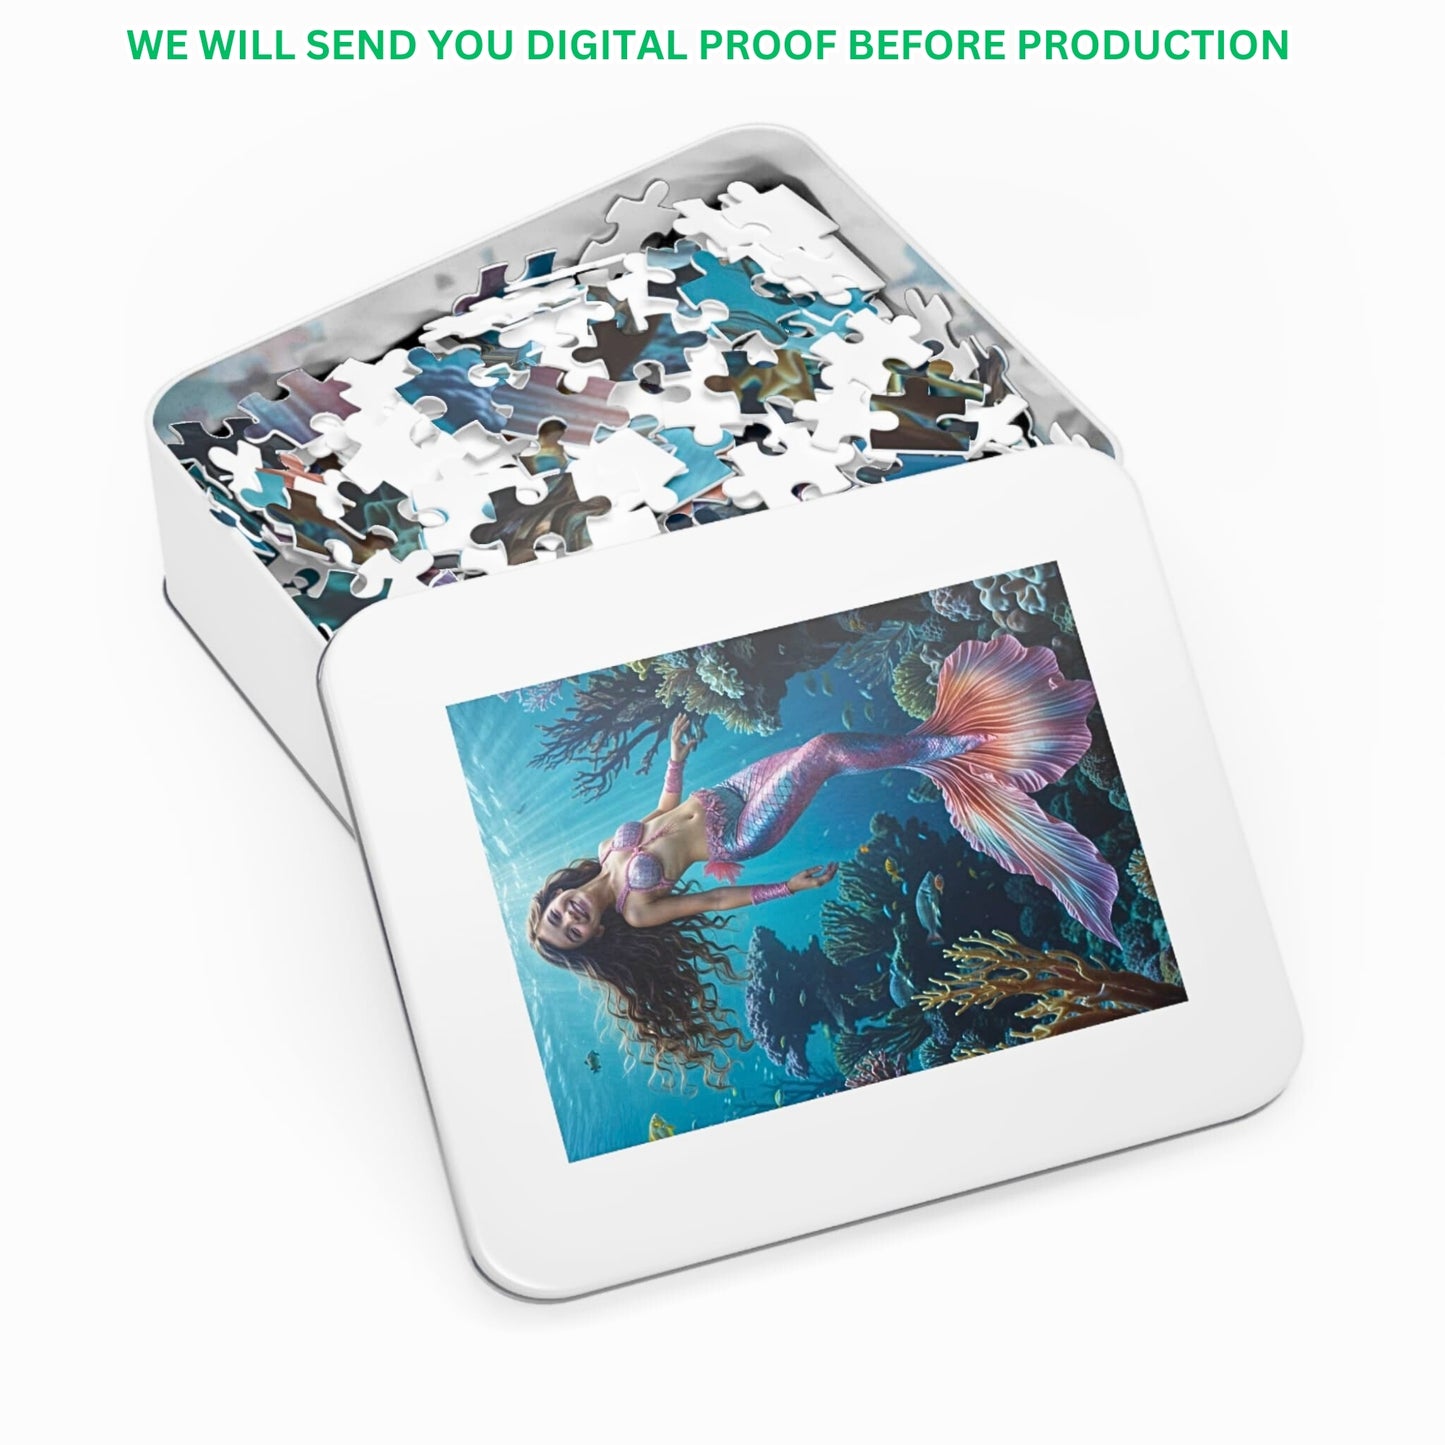 Transform photos into custom mermaid puzzles. Personalized little mermaid puzzle gifts. Create princess portraits. Ideal for princess birthdays. Choose 250-1000 pieces. Unique mermaid-themed gifts for girls.